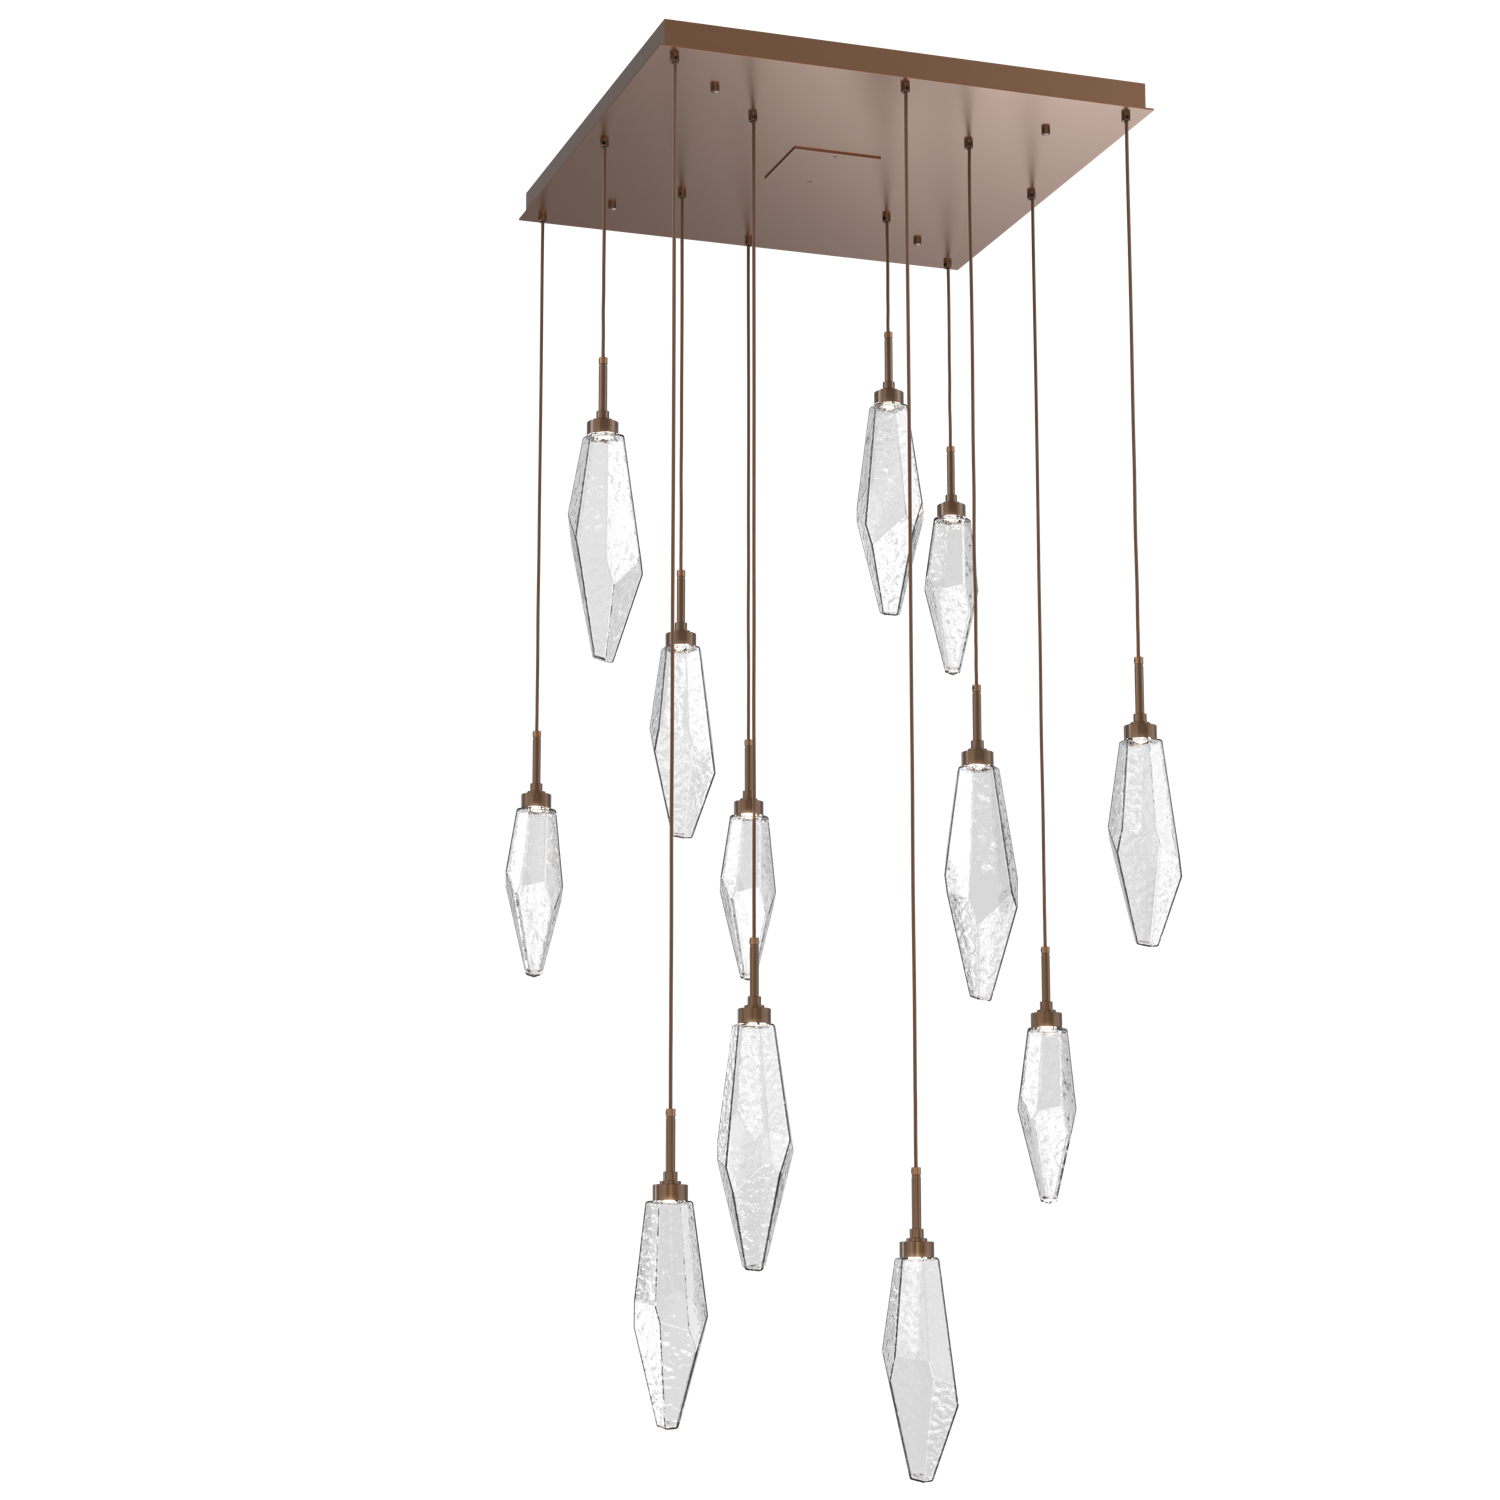 CHB0050-12-BB-CC-Hammerton-Studio-Rock-Crystal-12-light-square-pendant-chandelier-with-burnished-bronze-finish-and-clear-glass-shades-and-LED-lamping